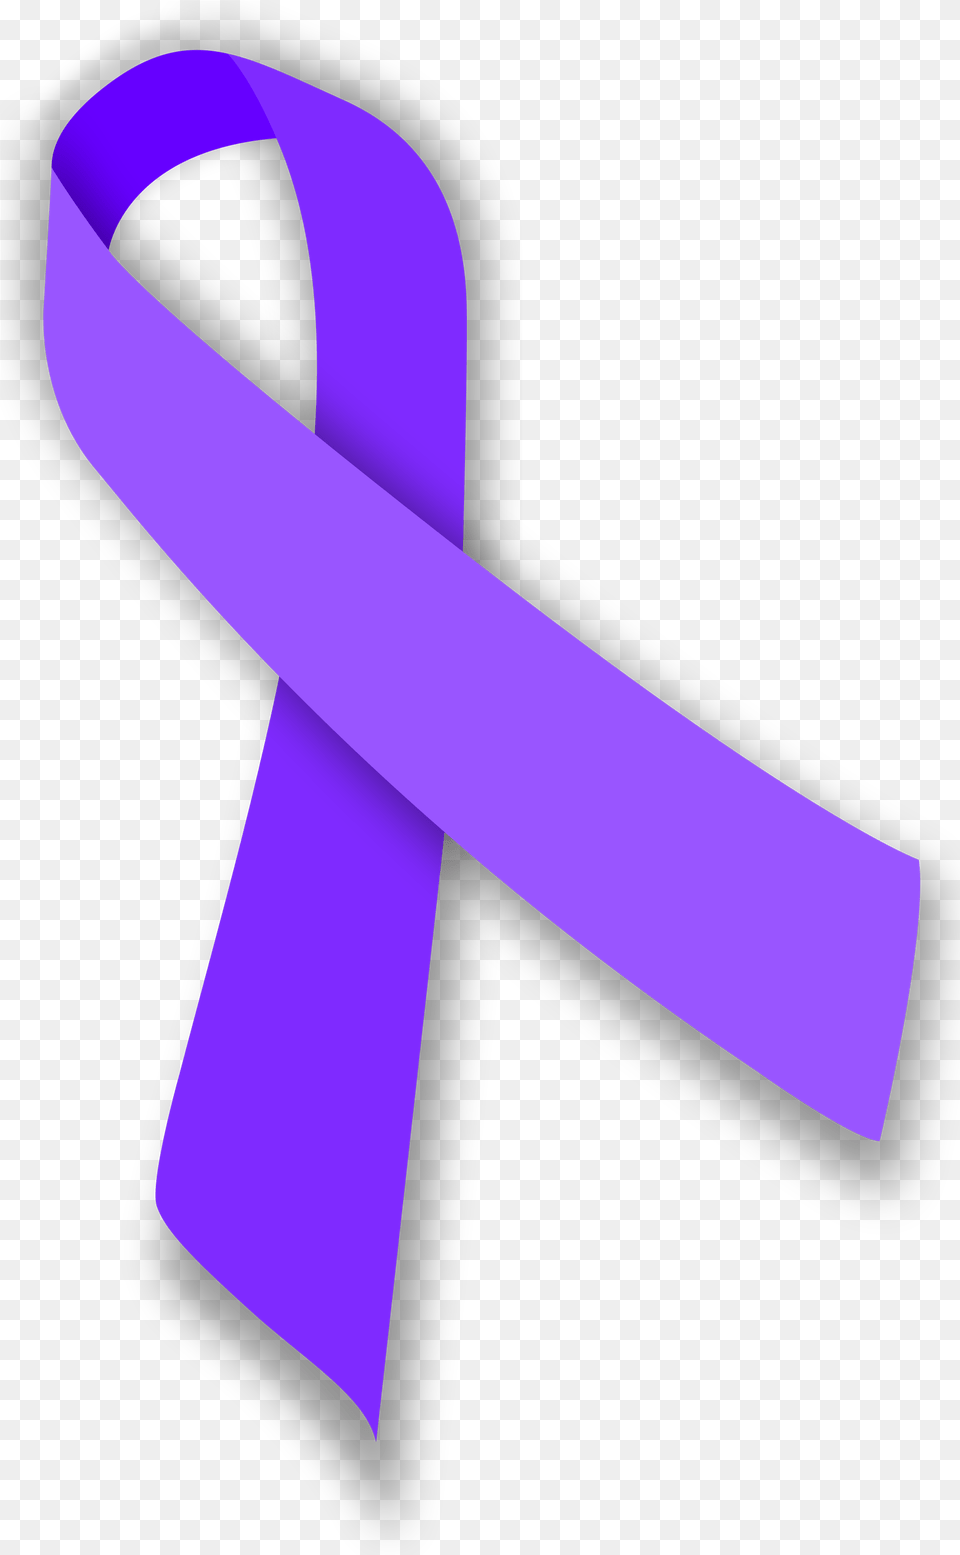 Download Hd Lavender Ribbon Picture Lymphoma Cancer Ribbon, Accessories, Formal Wear, Purple, Tie Png Image